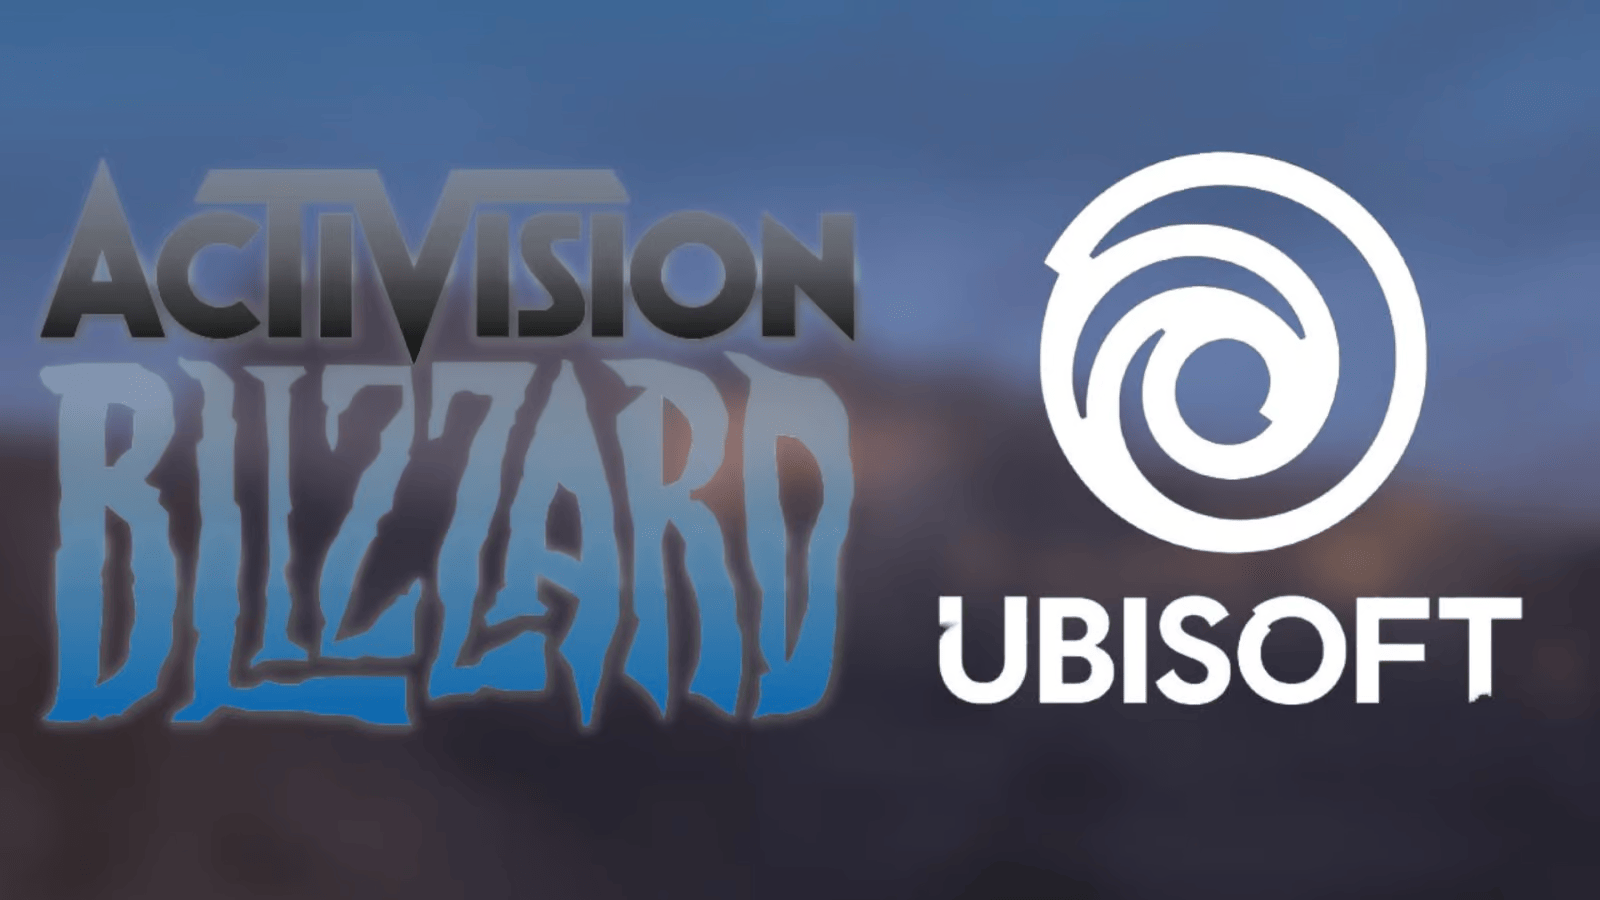 Ubisoft Secures Streaming Rights from Activision Blizzard